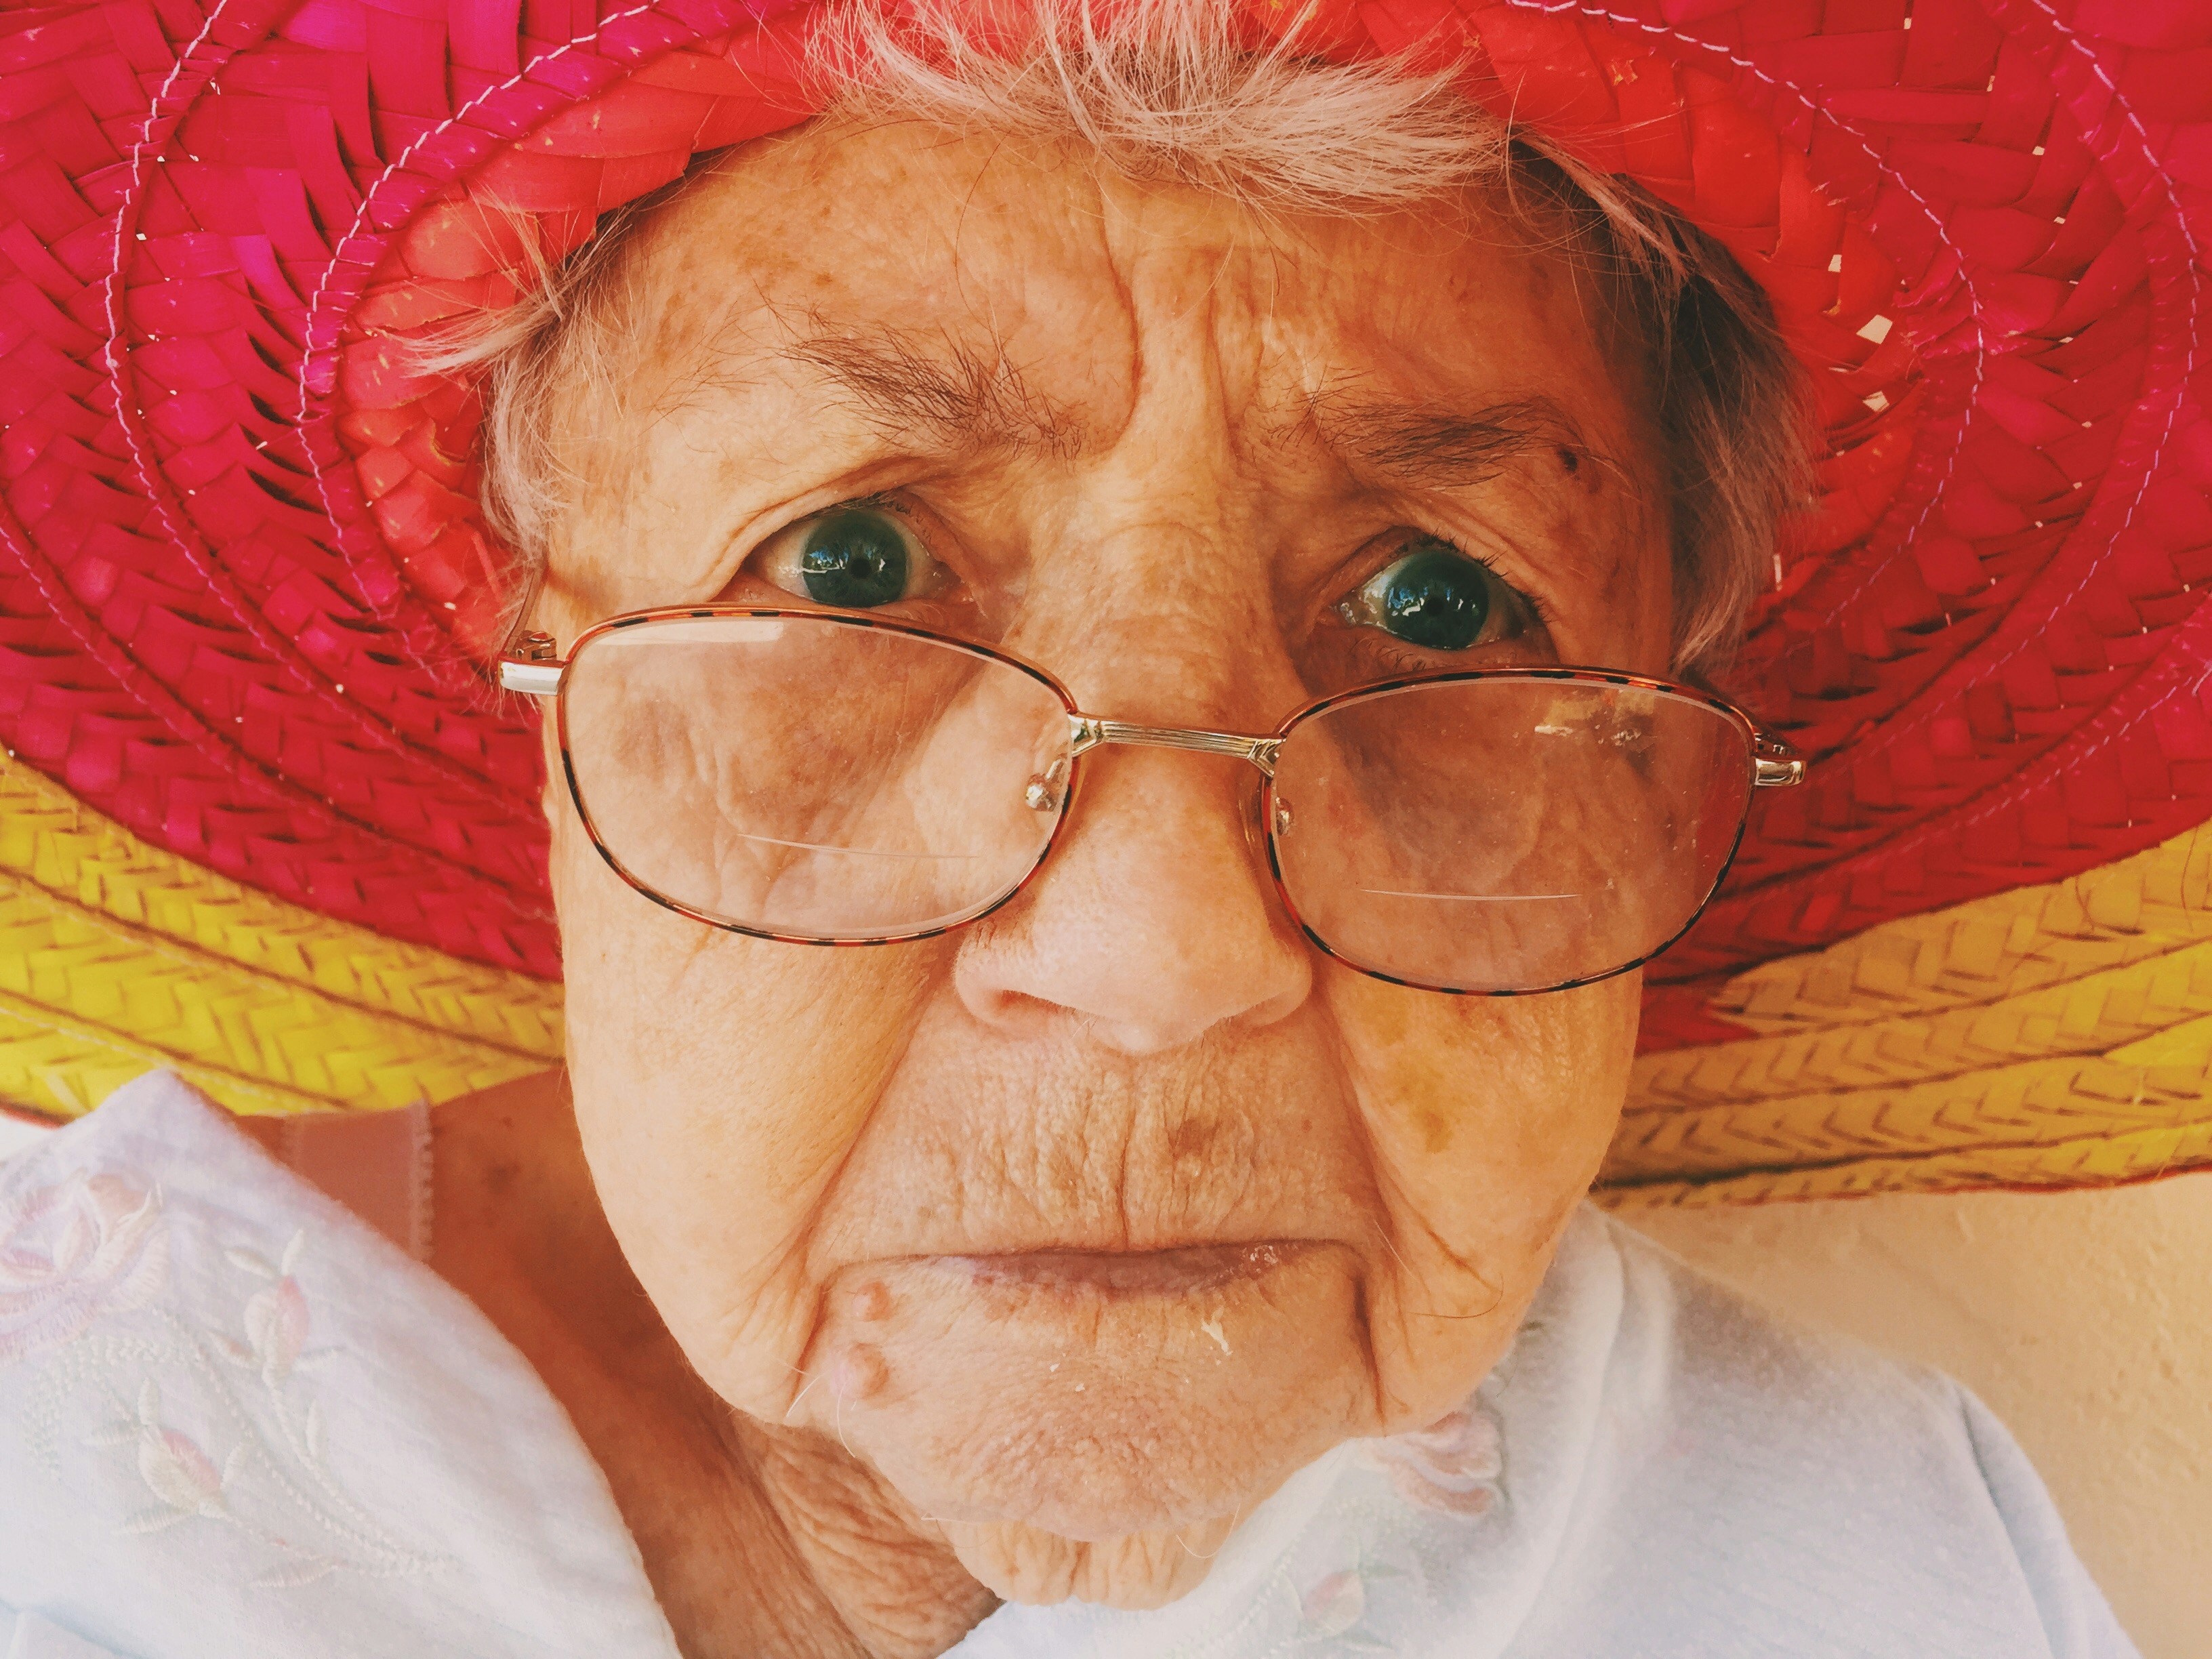 A shocked old woman | Source: Pexels